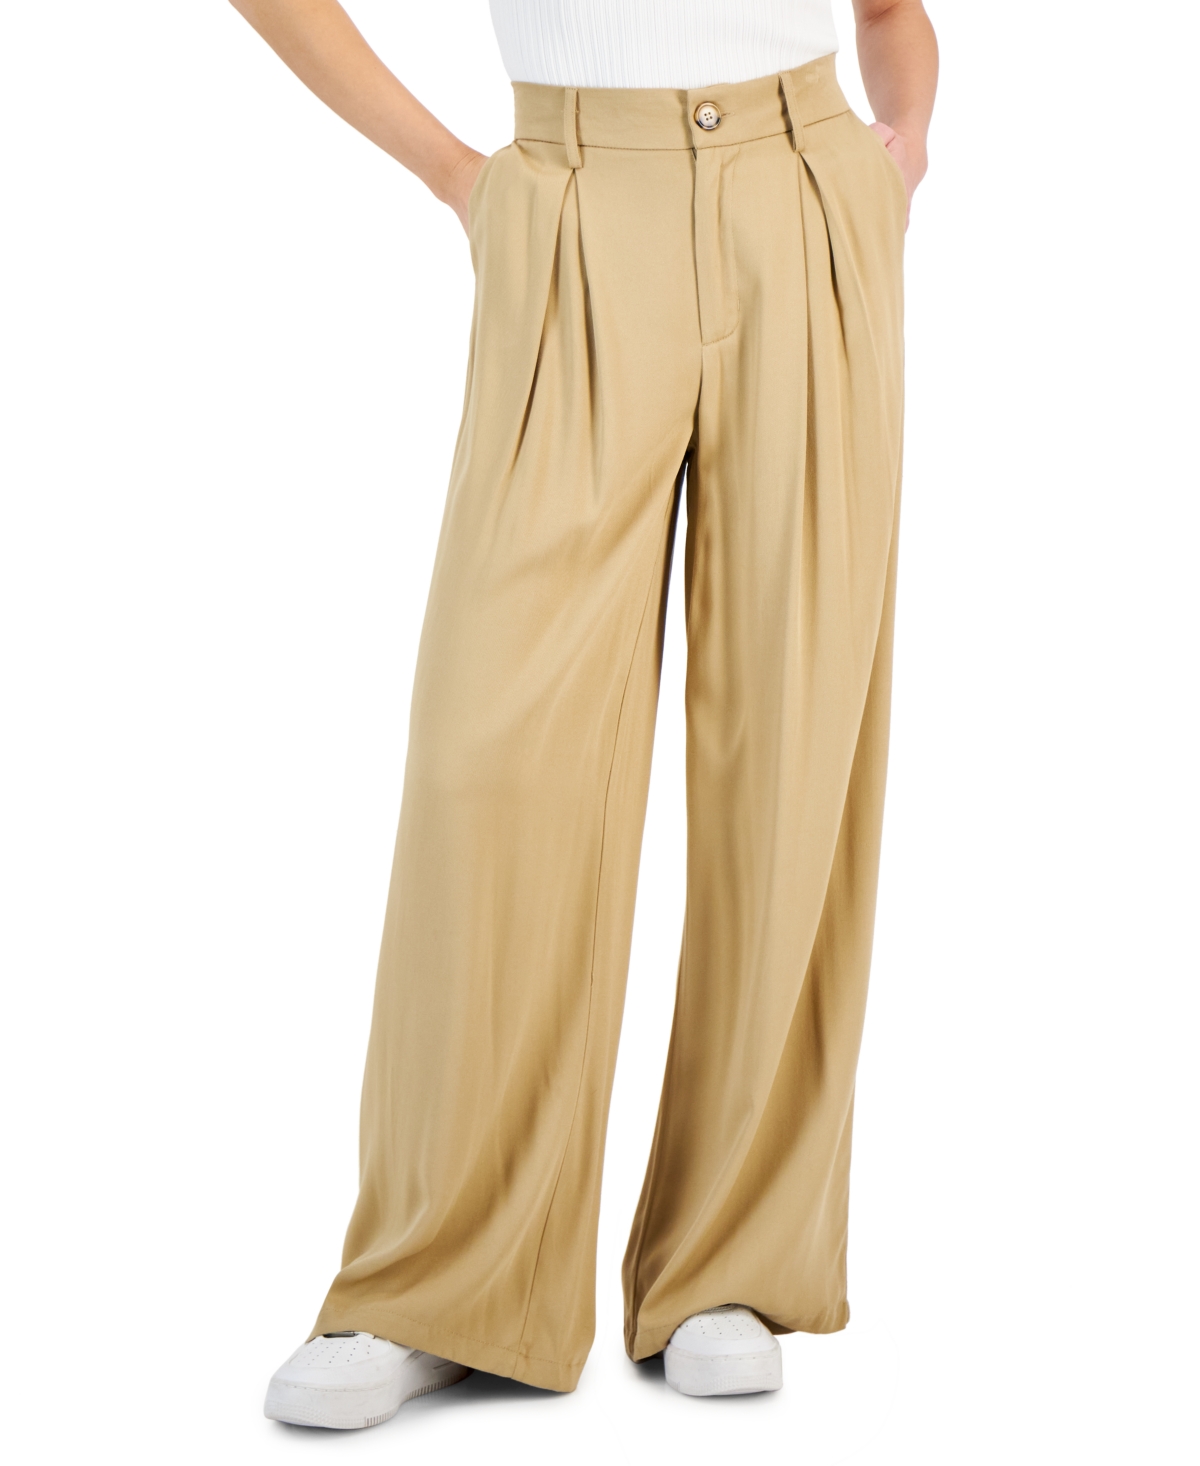 AND NOW THIS Pants for Women | ModeSens